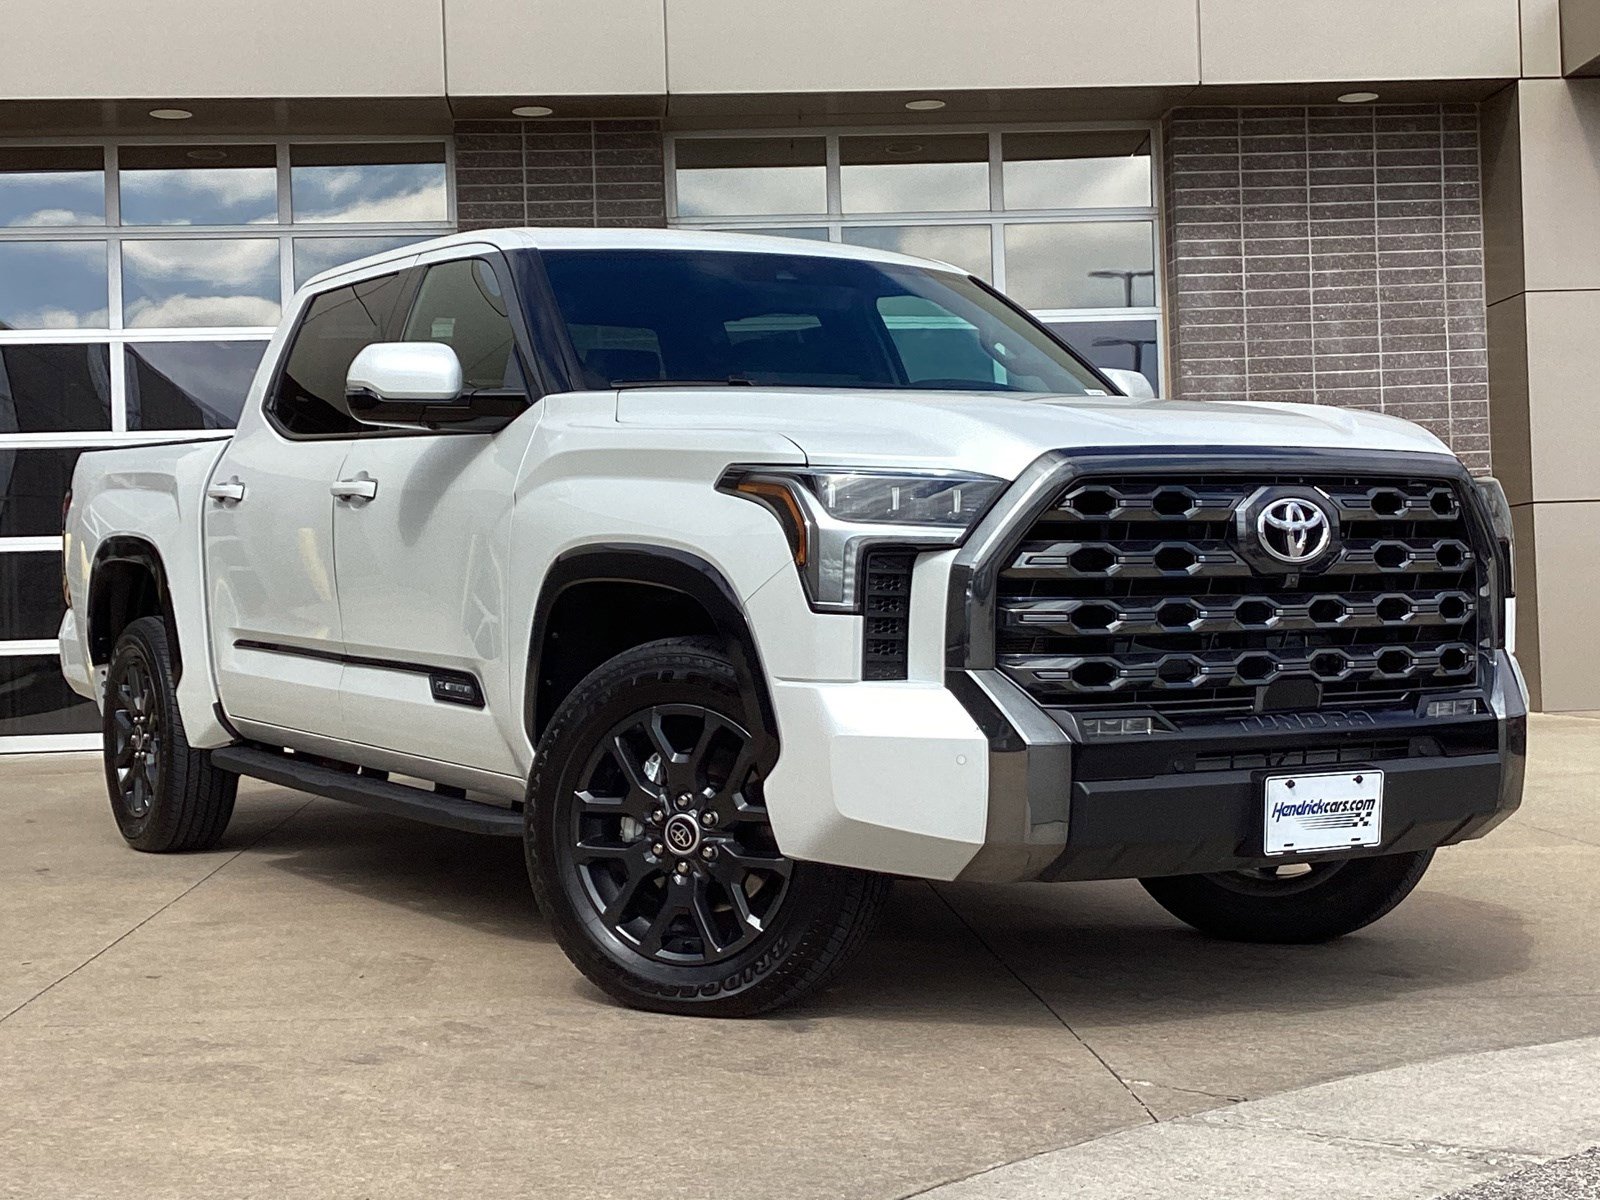 Pre-Owned 2022 Toyota Tundra 4WD Platinum Pickup in Duluth #SA10766 |  Gwinnett Place Honda